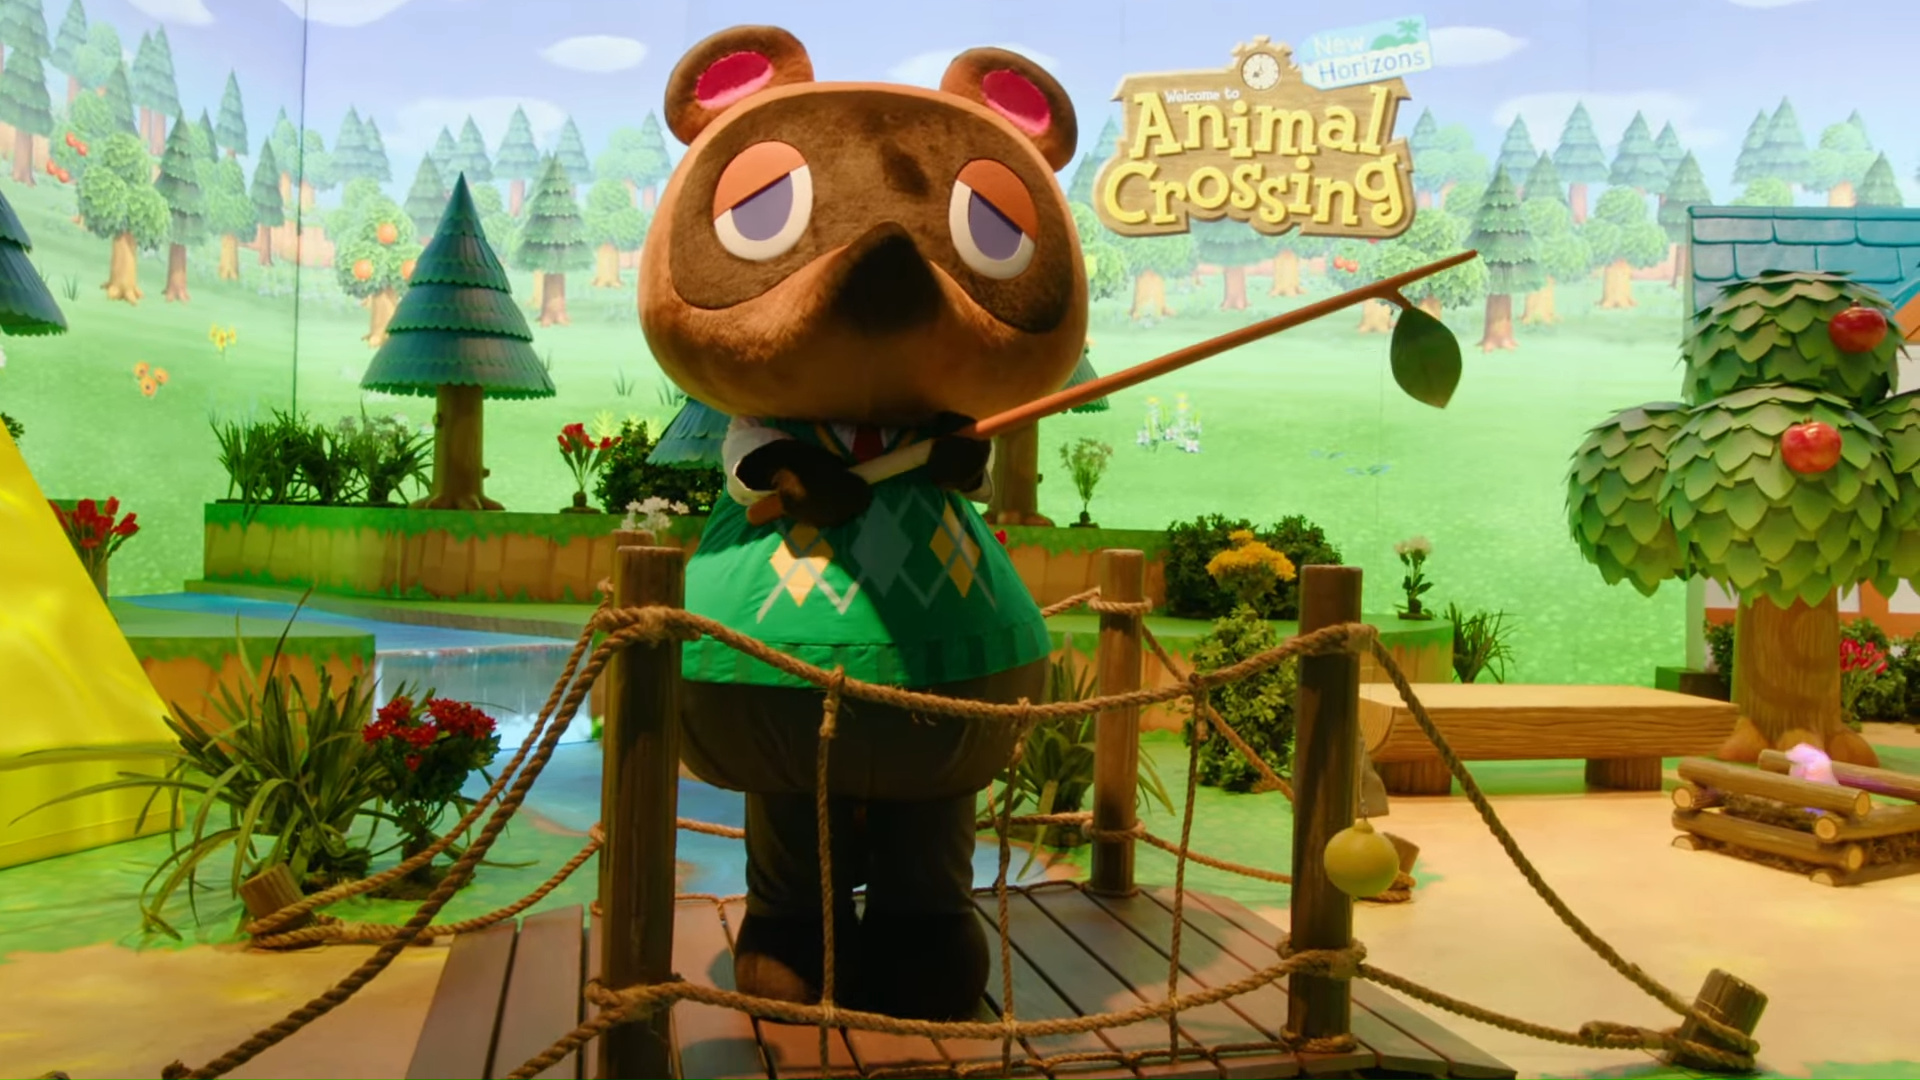 Video: Animal Crossing: New Horizons Comes To Life At PAX East 2020